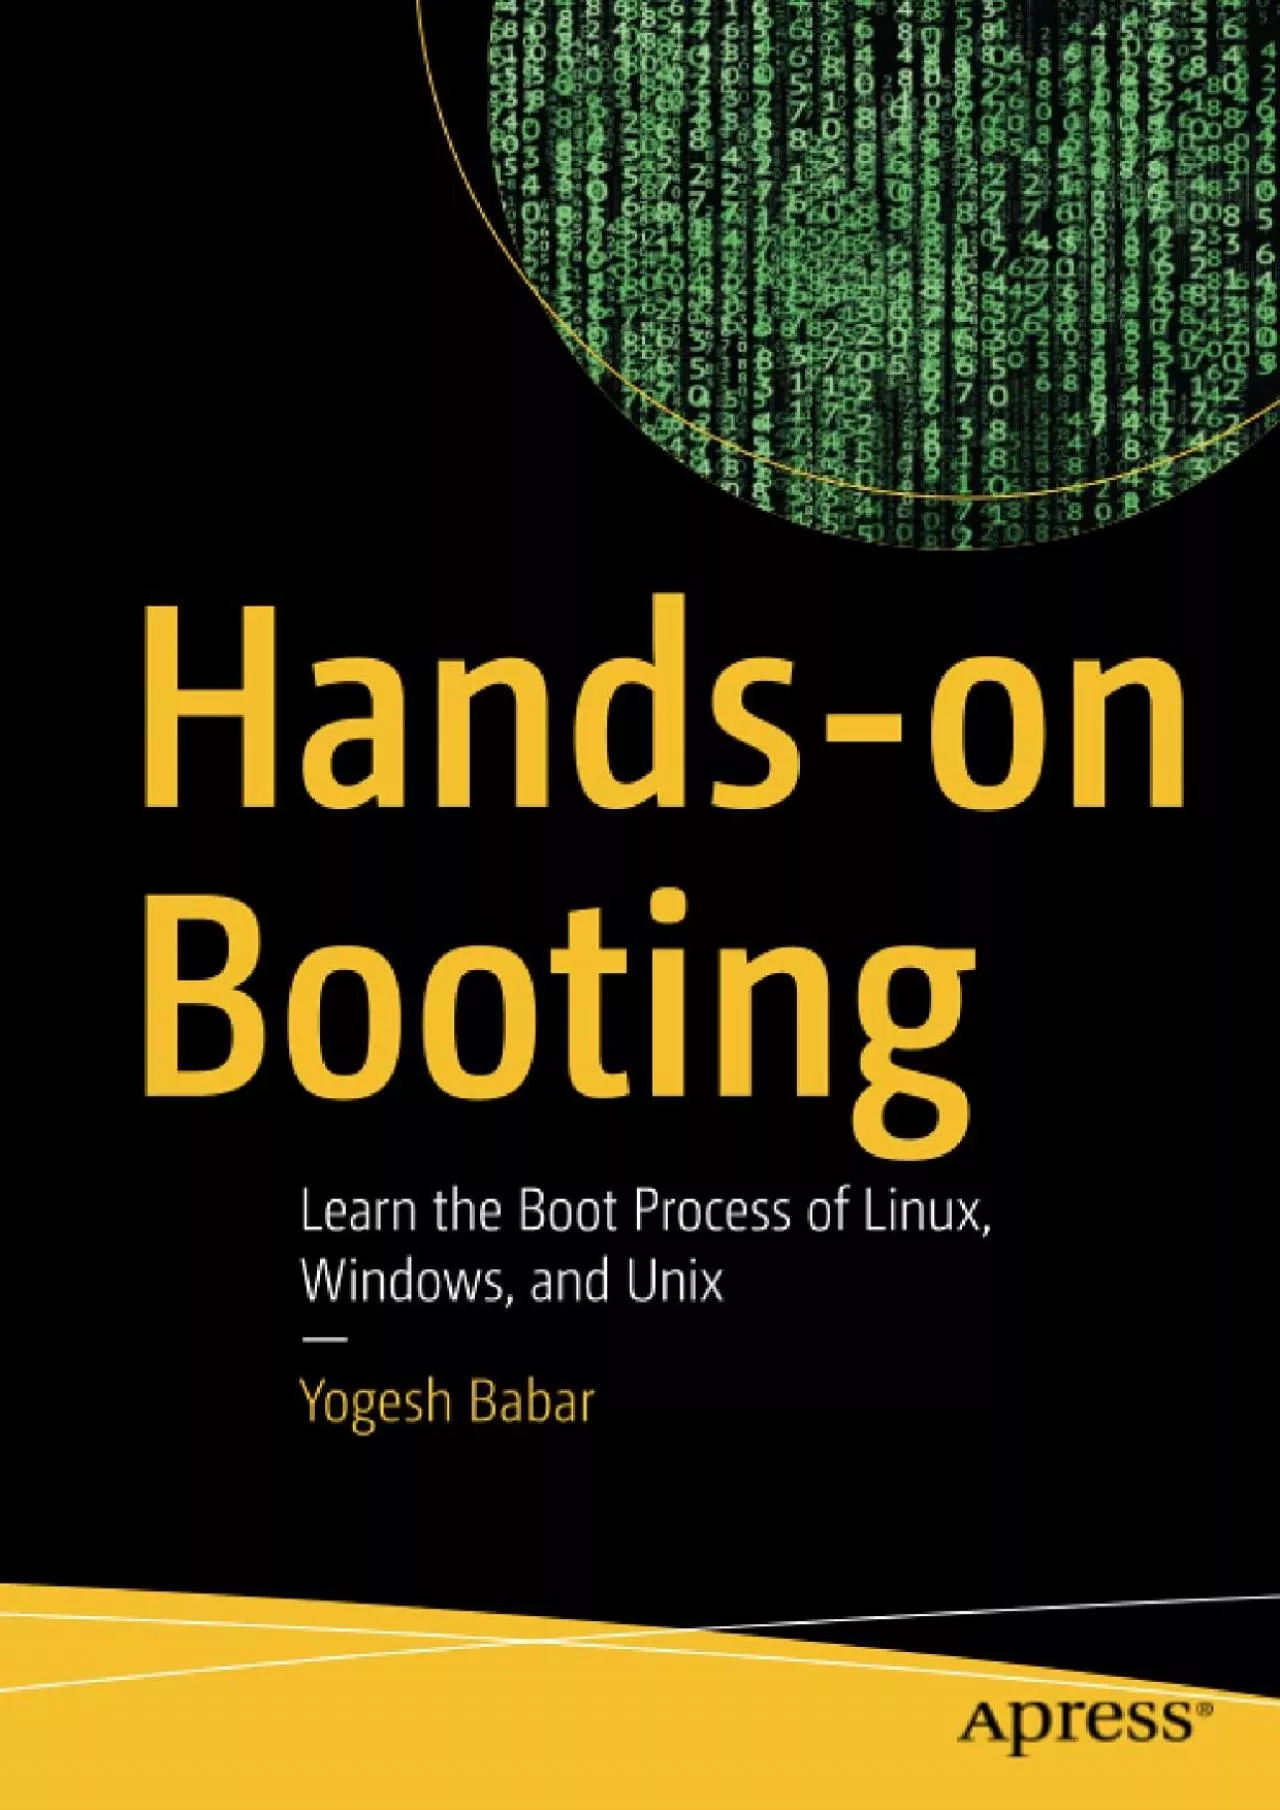 [eBOOK]-Hands-on Booting: Learn the Boot Process of Linux, Windows, and Unix